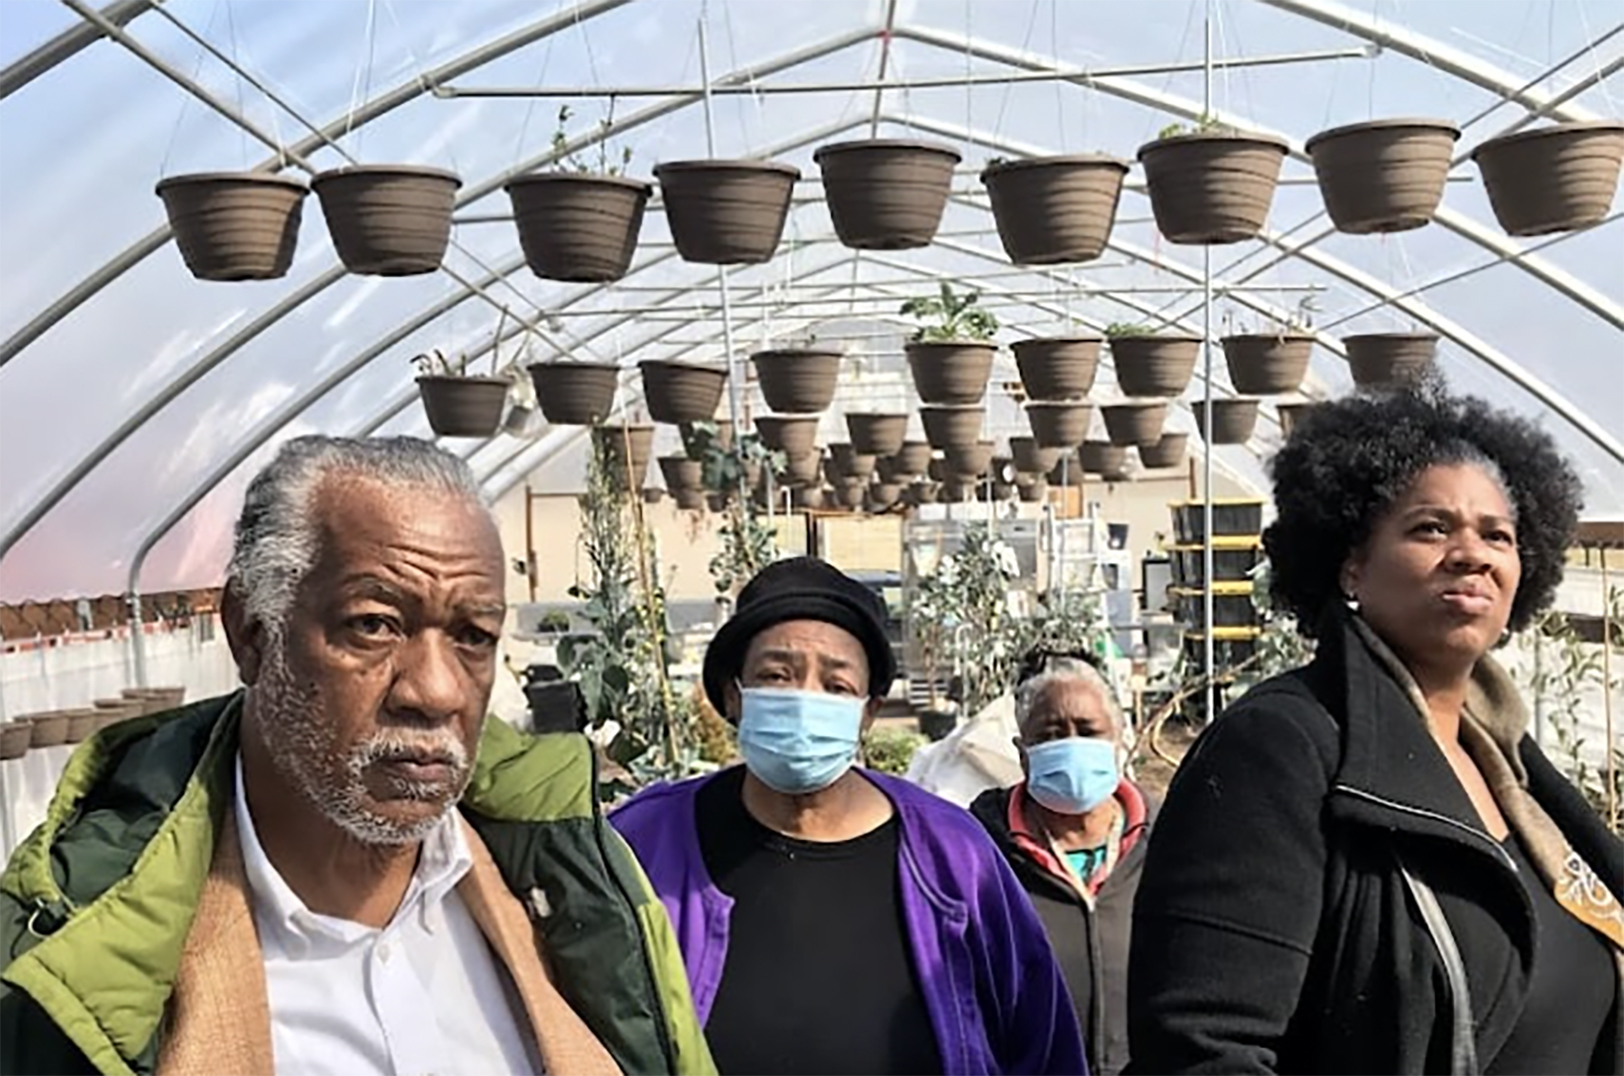 Growing movement by Black farmers seeds plan to honor land, ancestors while cultivating better health